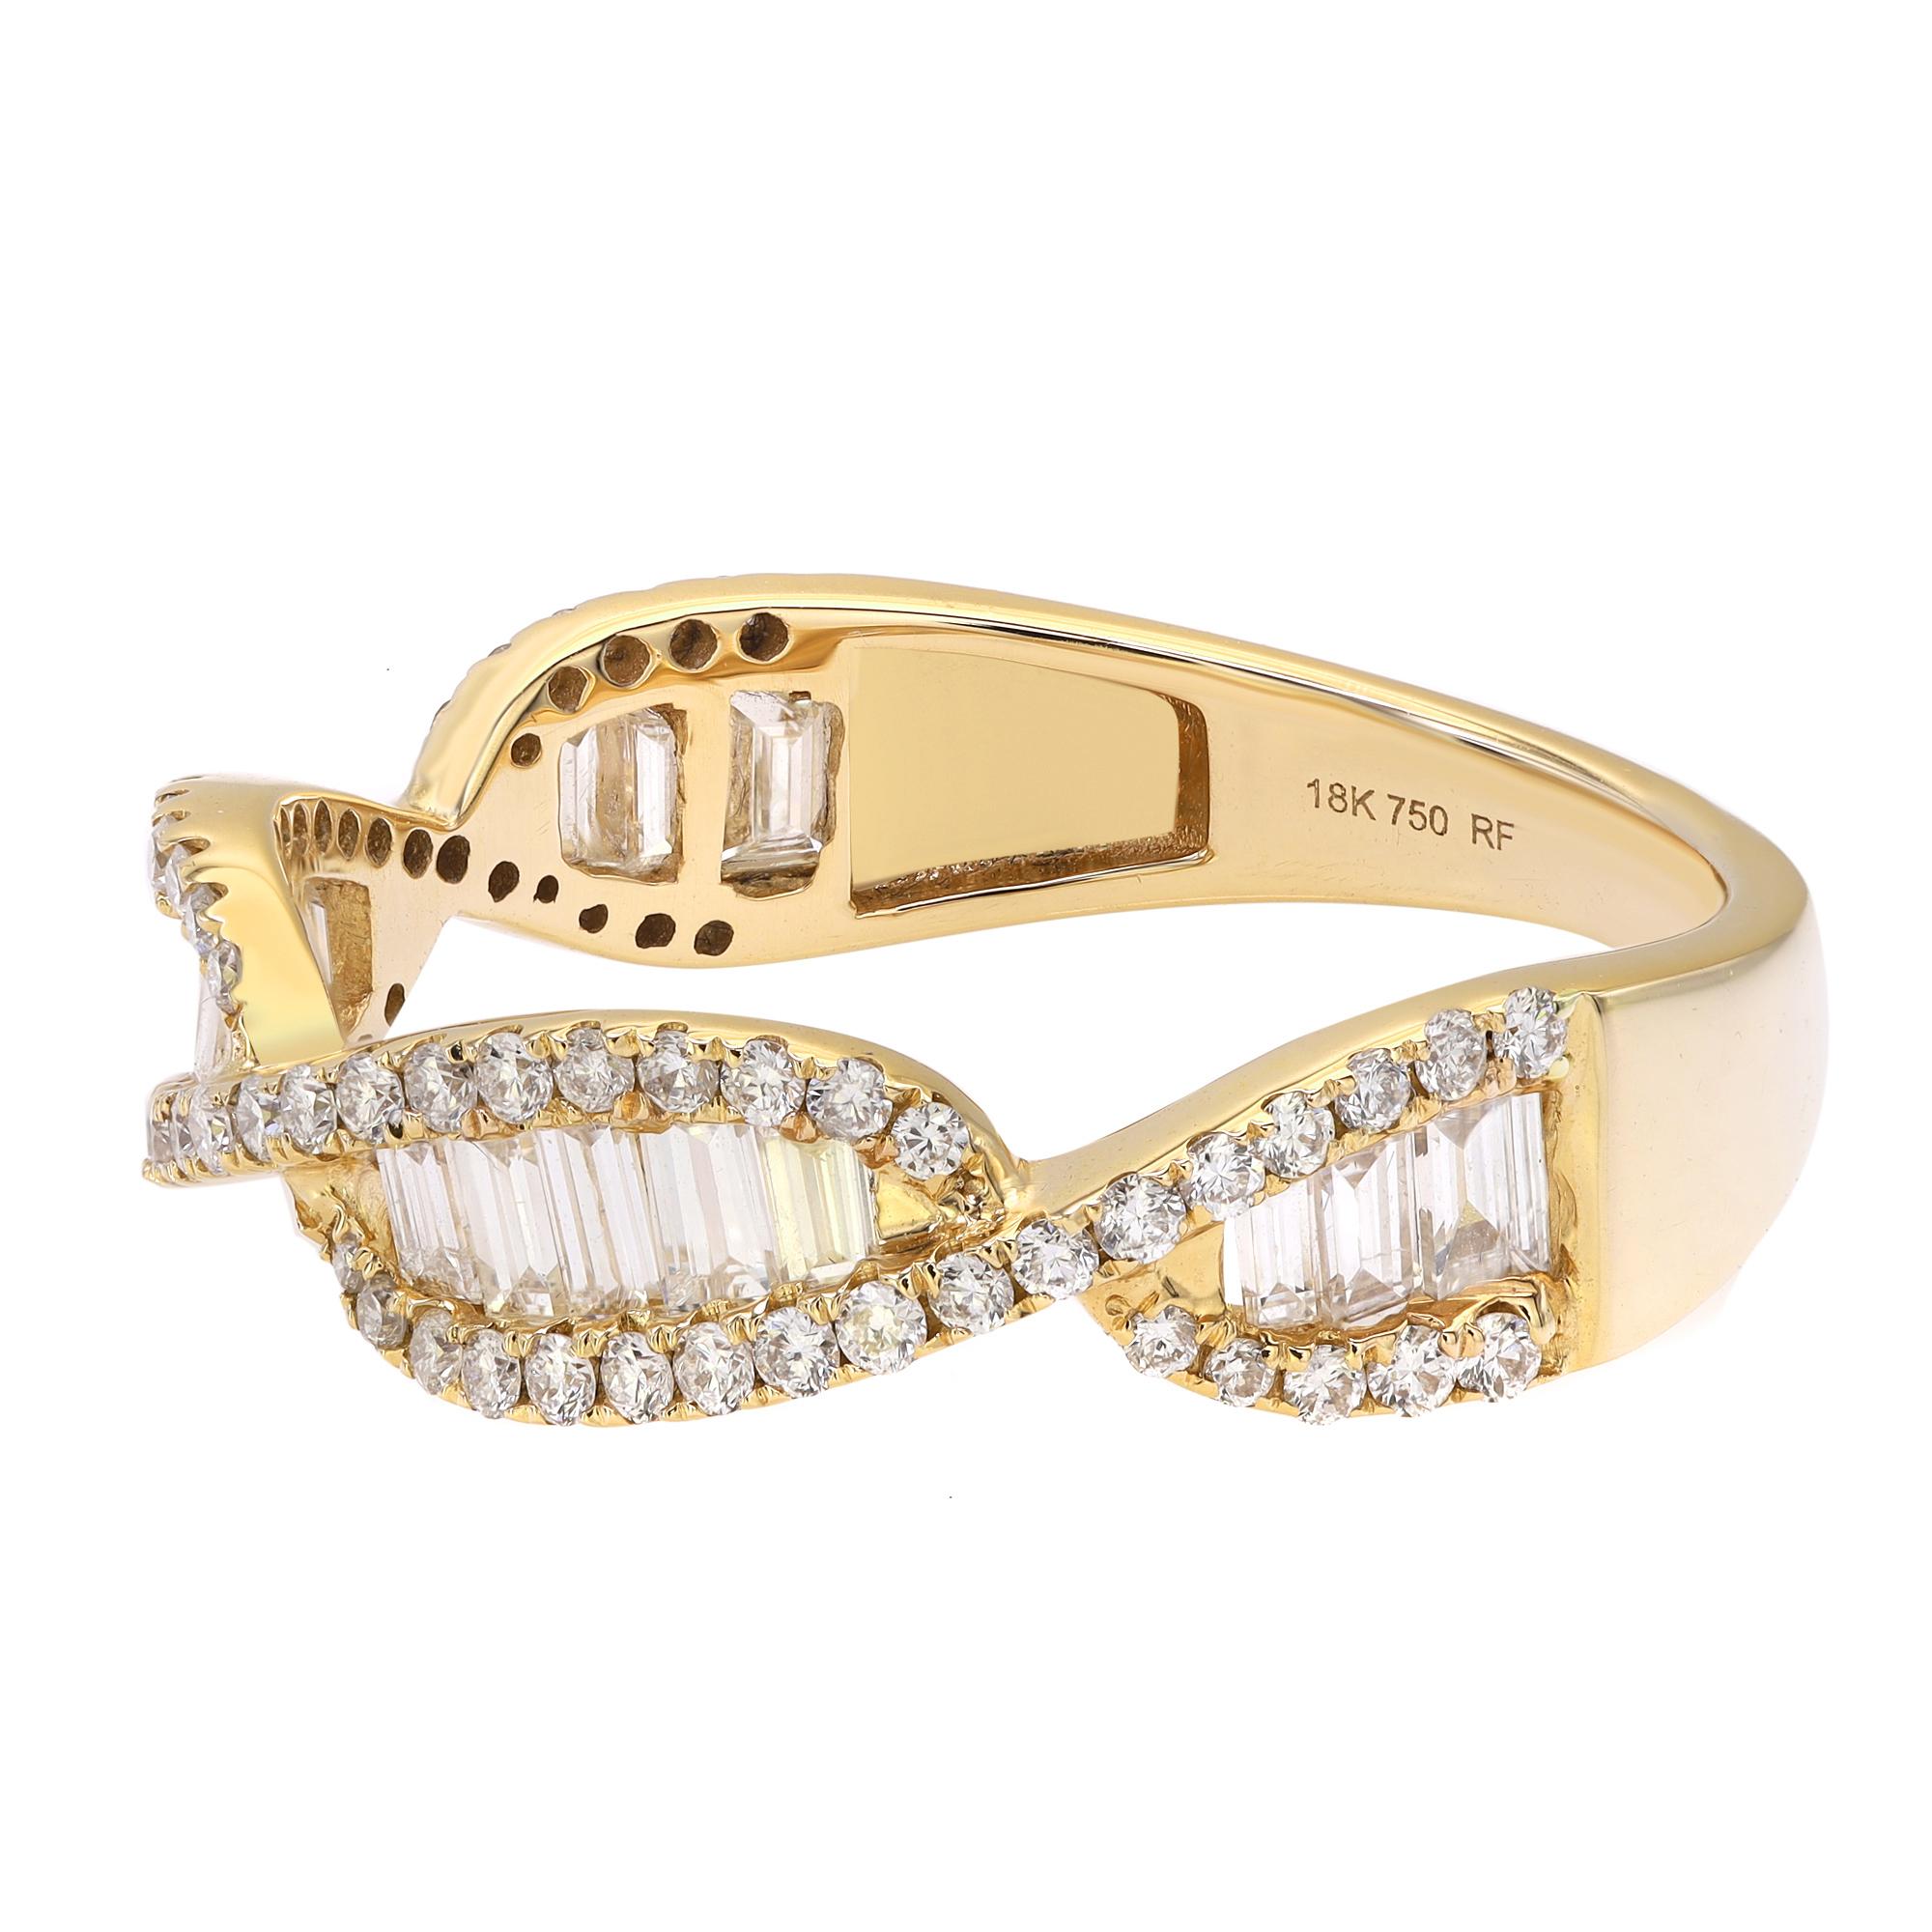 Simple and elegant, diamond twist wedding ring. Crafted in bright 18k yellow gold. It features two rows of petite pave set round brilliant cut diamonds intertwined with center channel set baguette cut diamonds for a timeless, eye catching style.